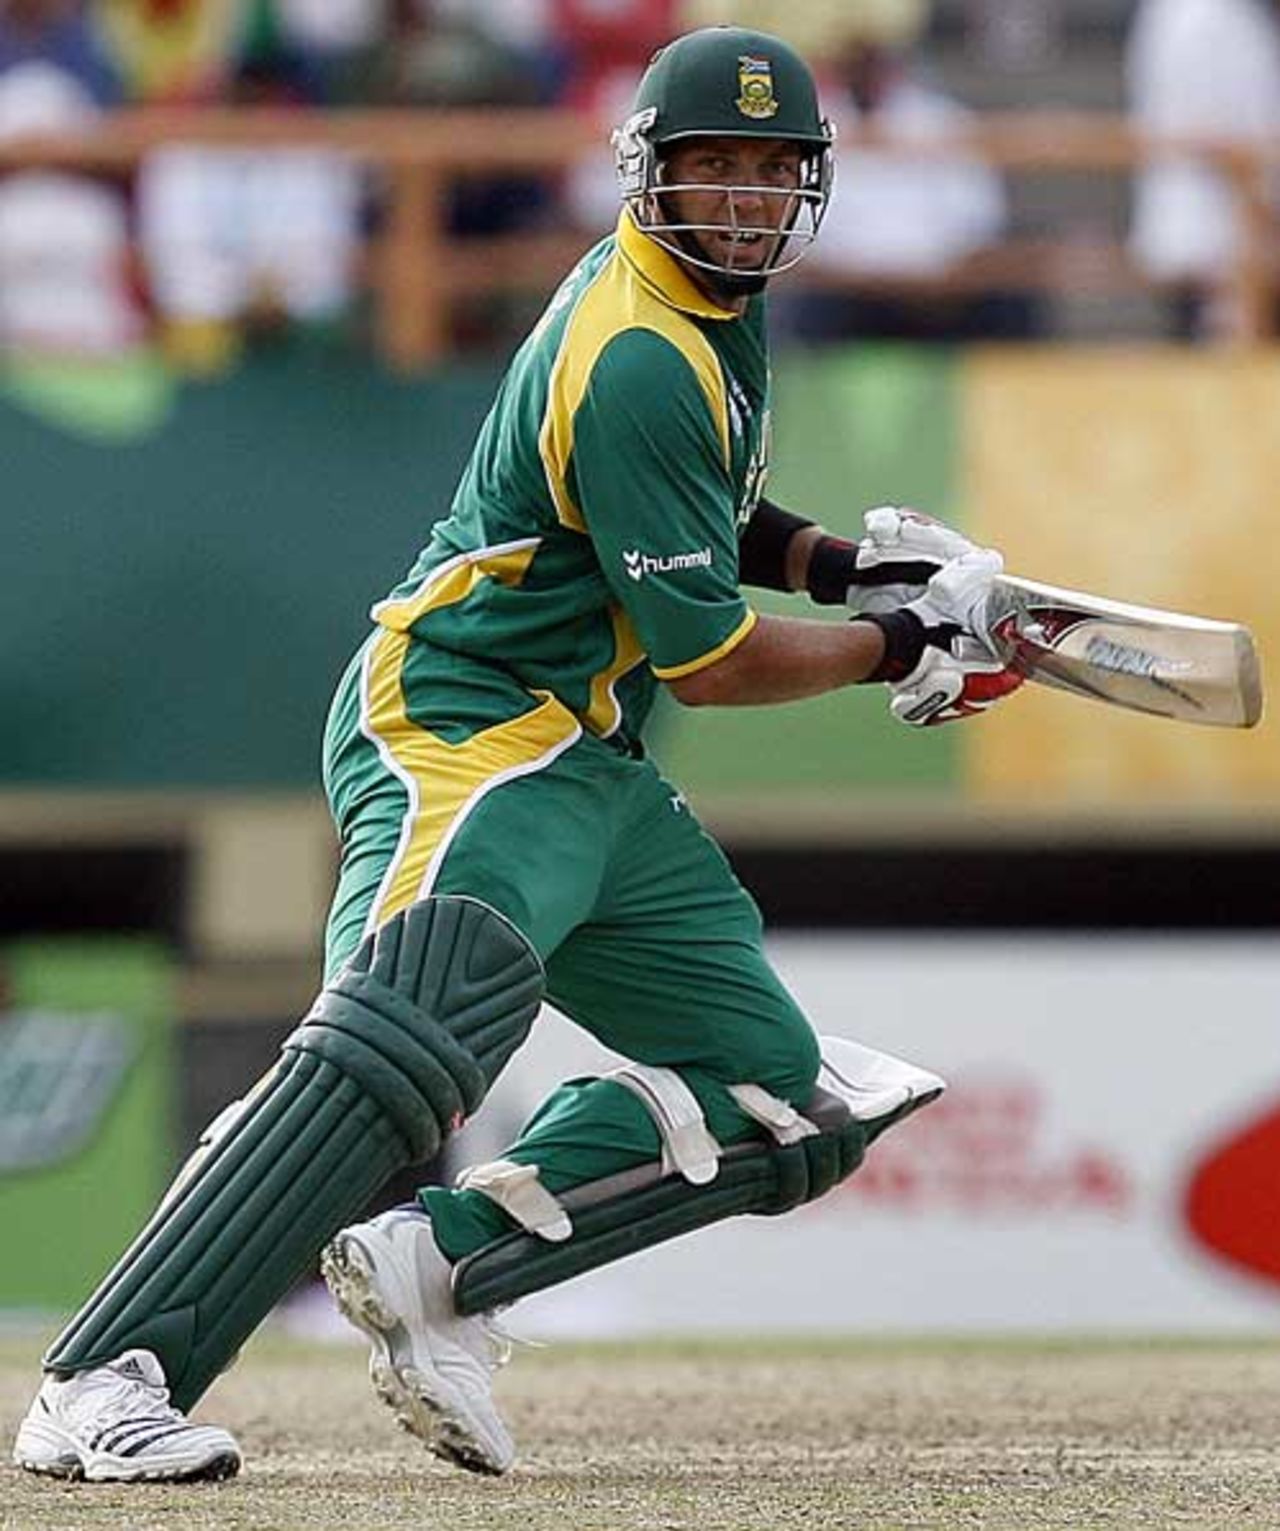 Jacques Kallis guides the ball through the off side, Ireland v South Africa, Guyana, April 3, 2007